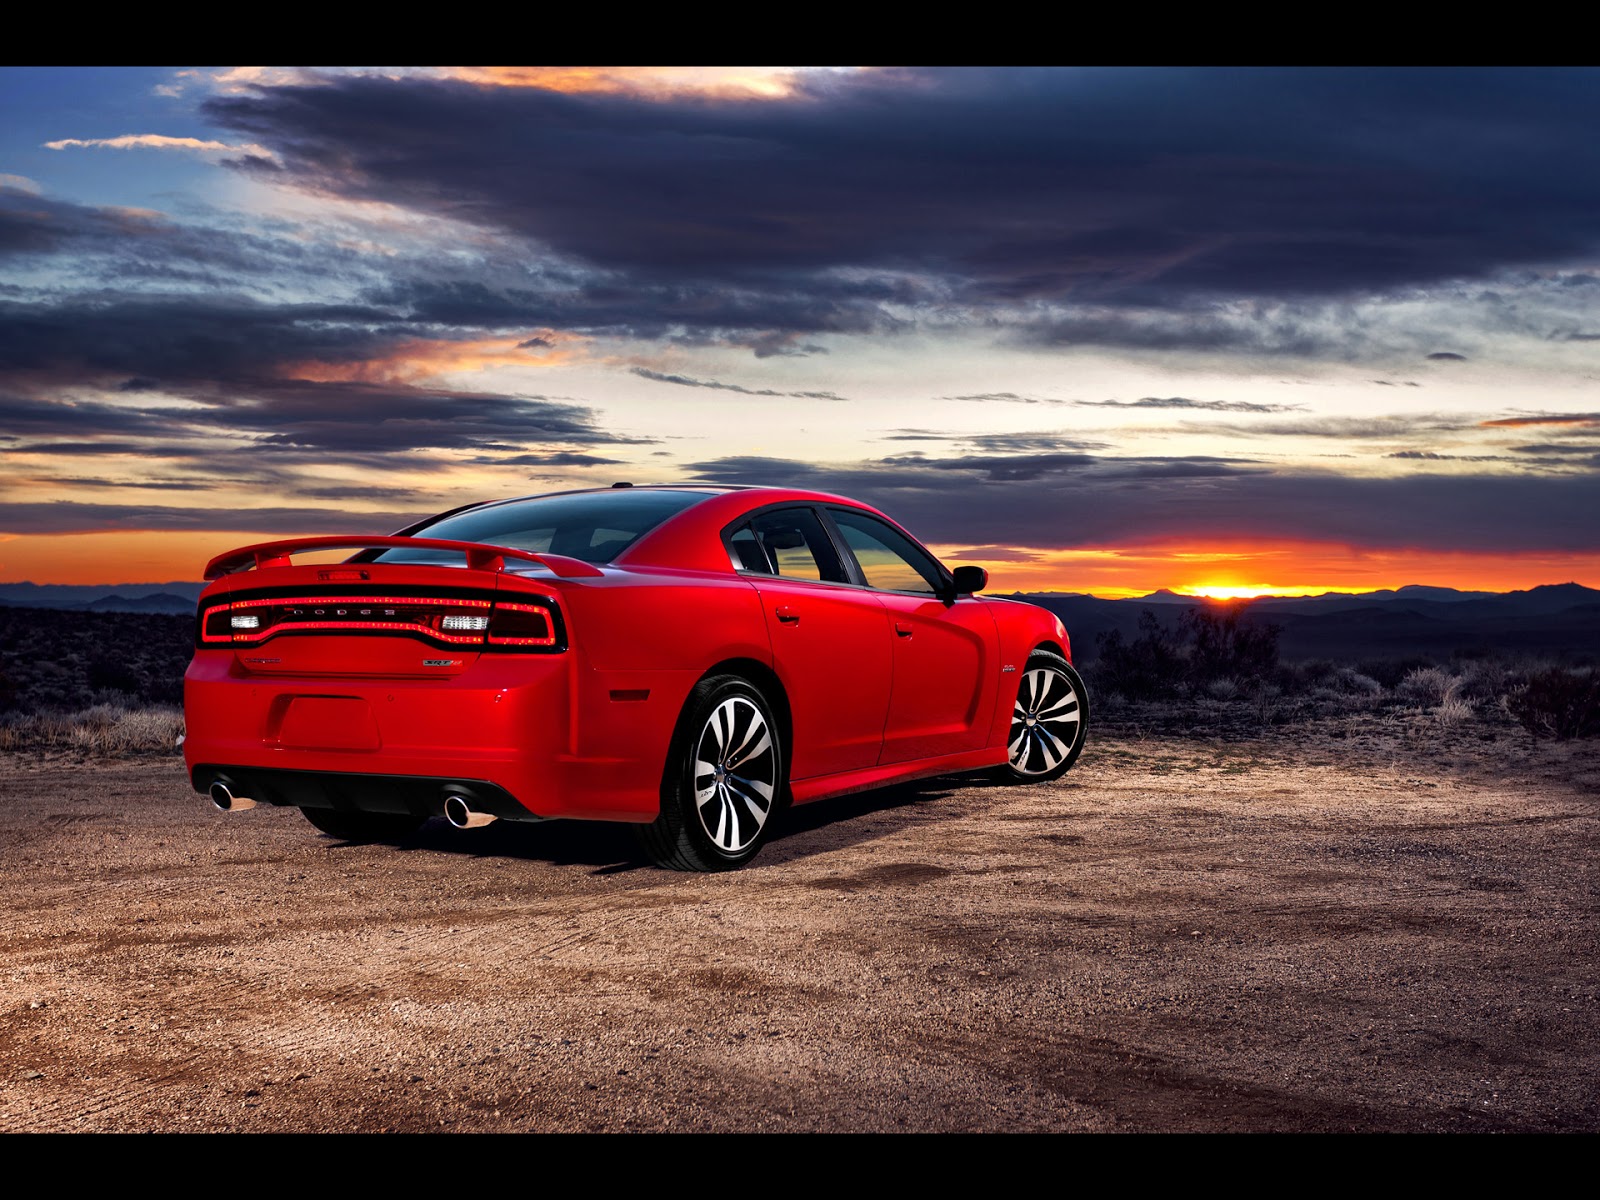 High Definition Wallpaper Club: 2012 Dodge Charger RT 2 Wallpapers